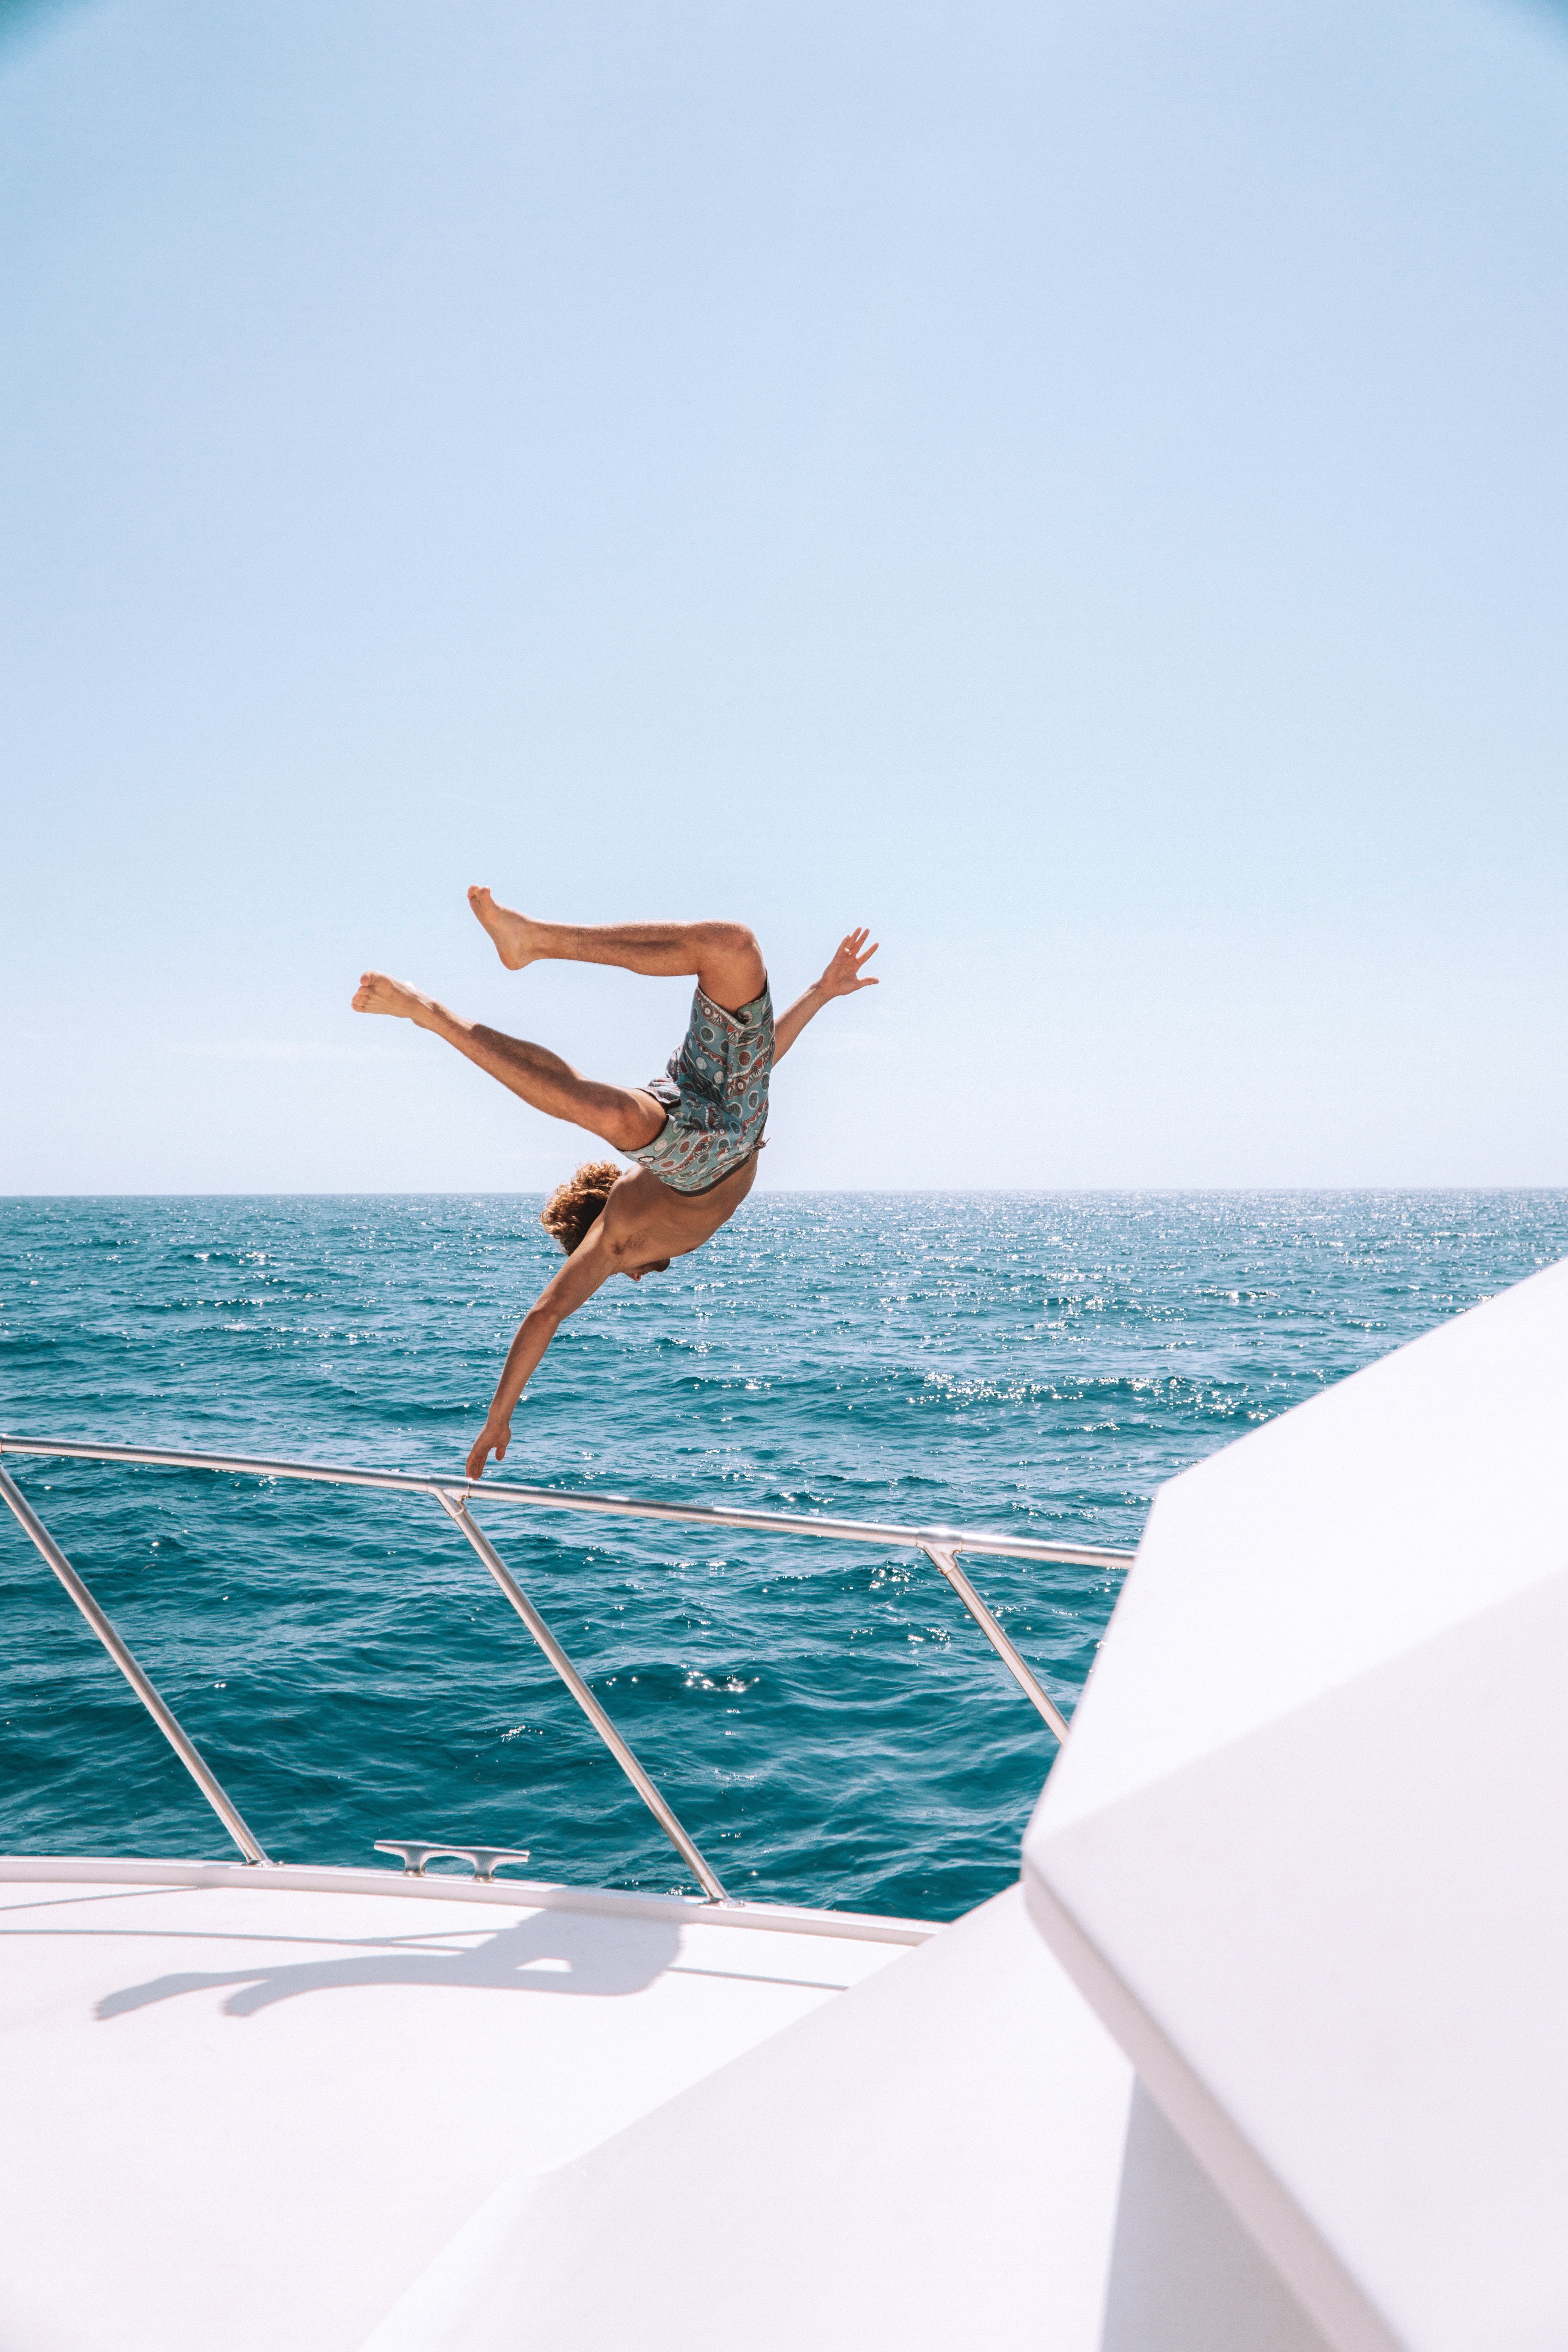 Am image of a young man diving gleefully off the side of a boat in a large body of water